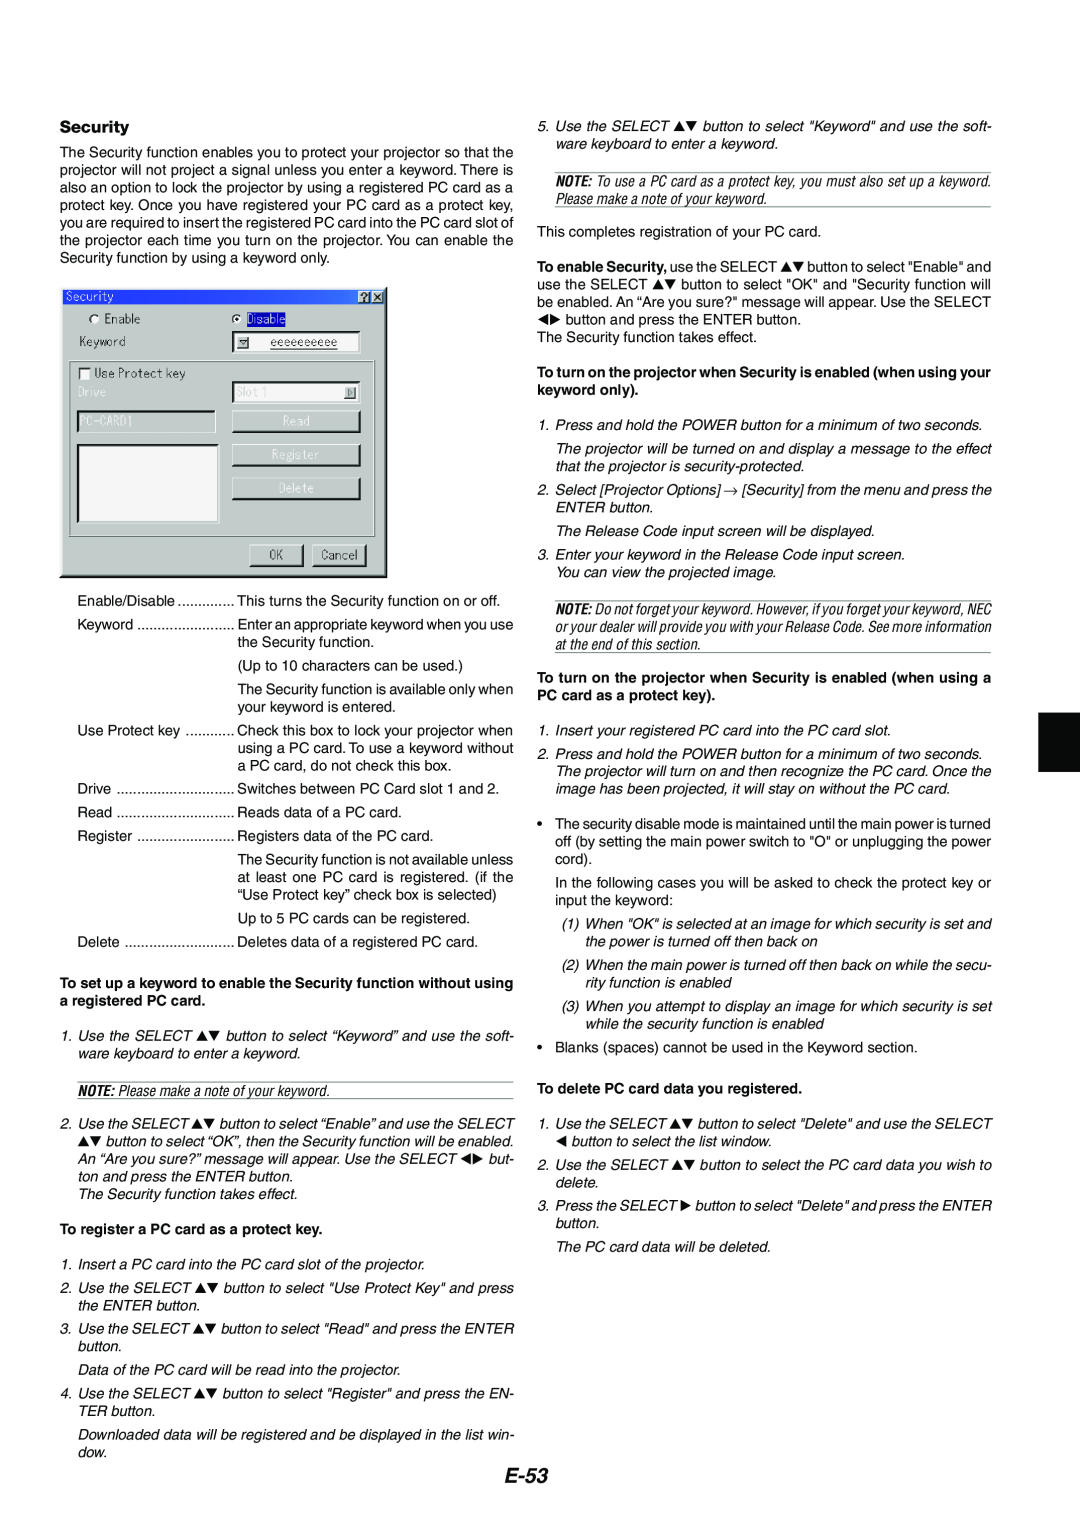 NEC MT1075/MT1065 user manual E-53, To register a PC card as a protect key, To enable Security, use the SELECT 